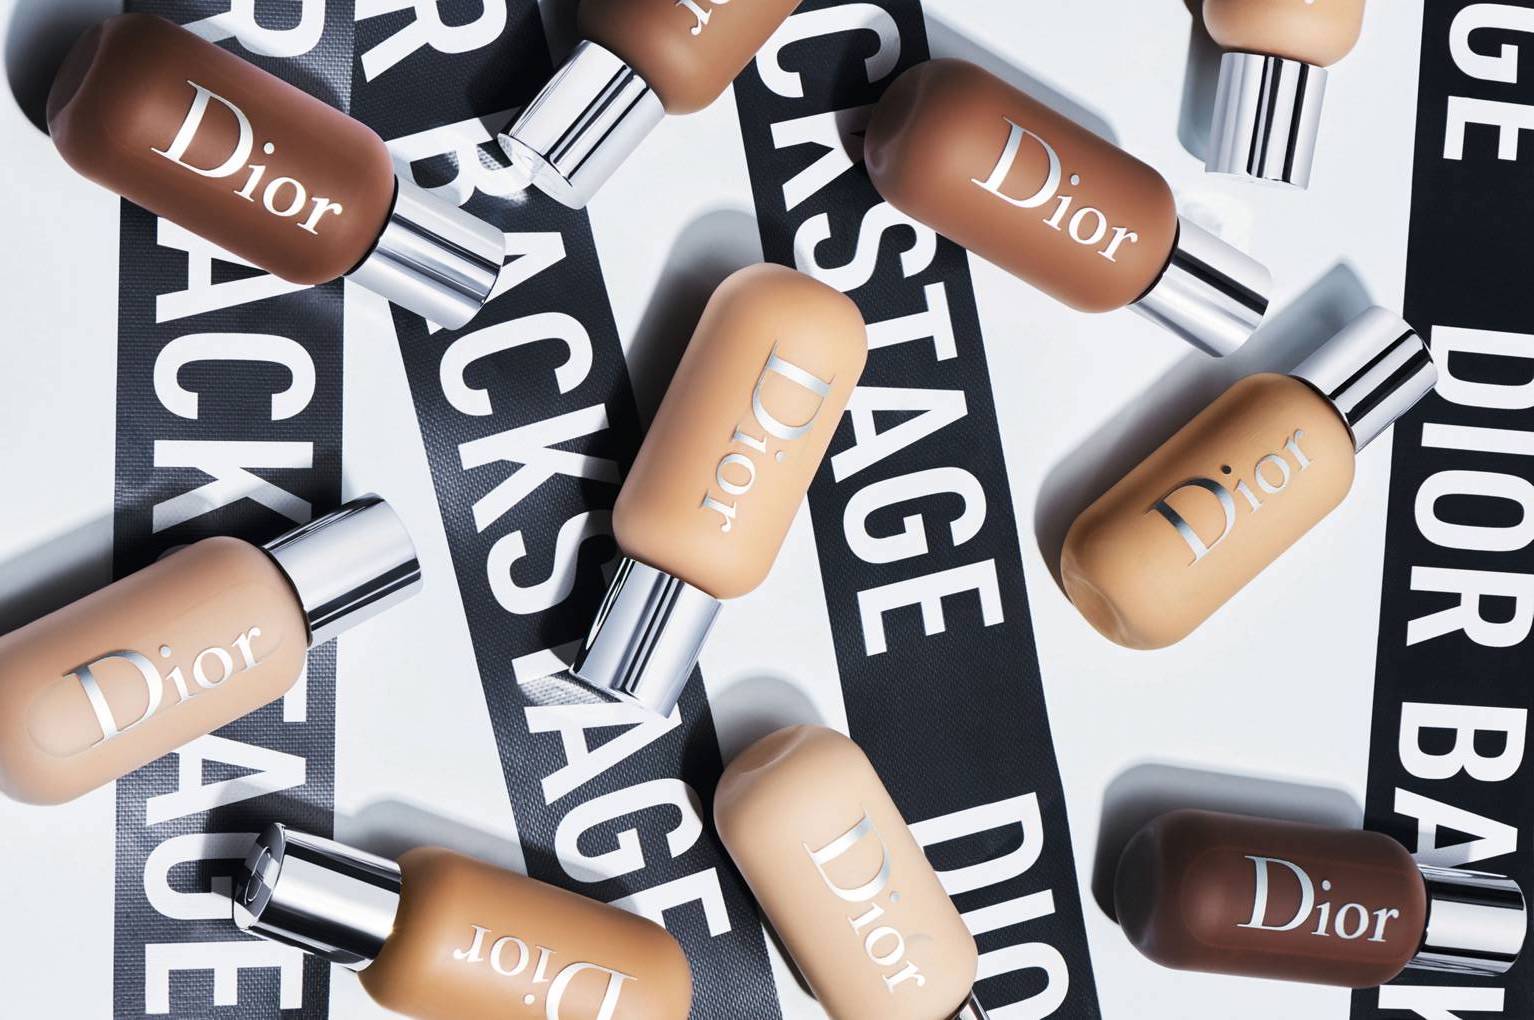 Dior launches Backstage, its new makeup line for the Instagram age